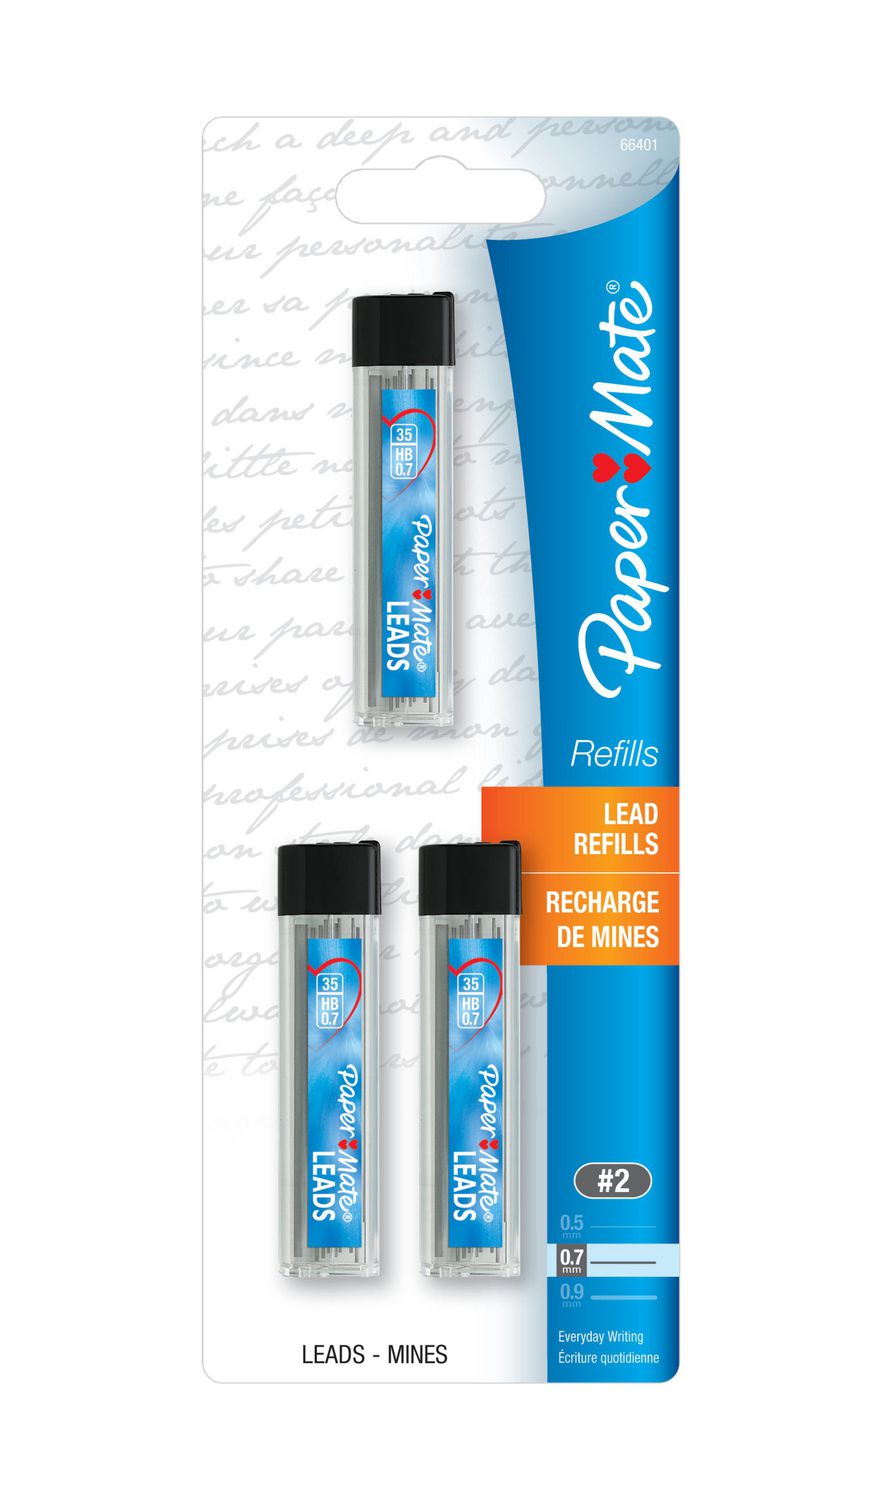 Paper Mate InkJoy 0.5mm Refill – Star 360